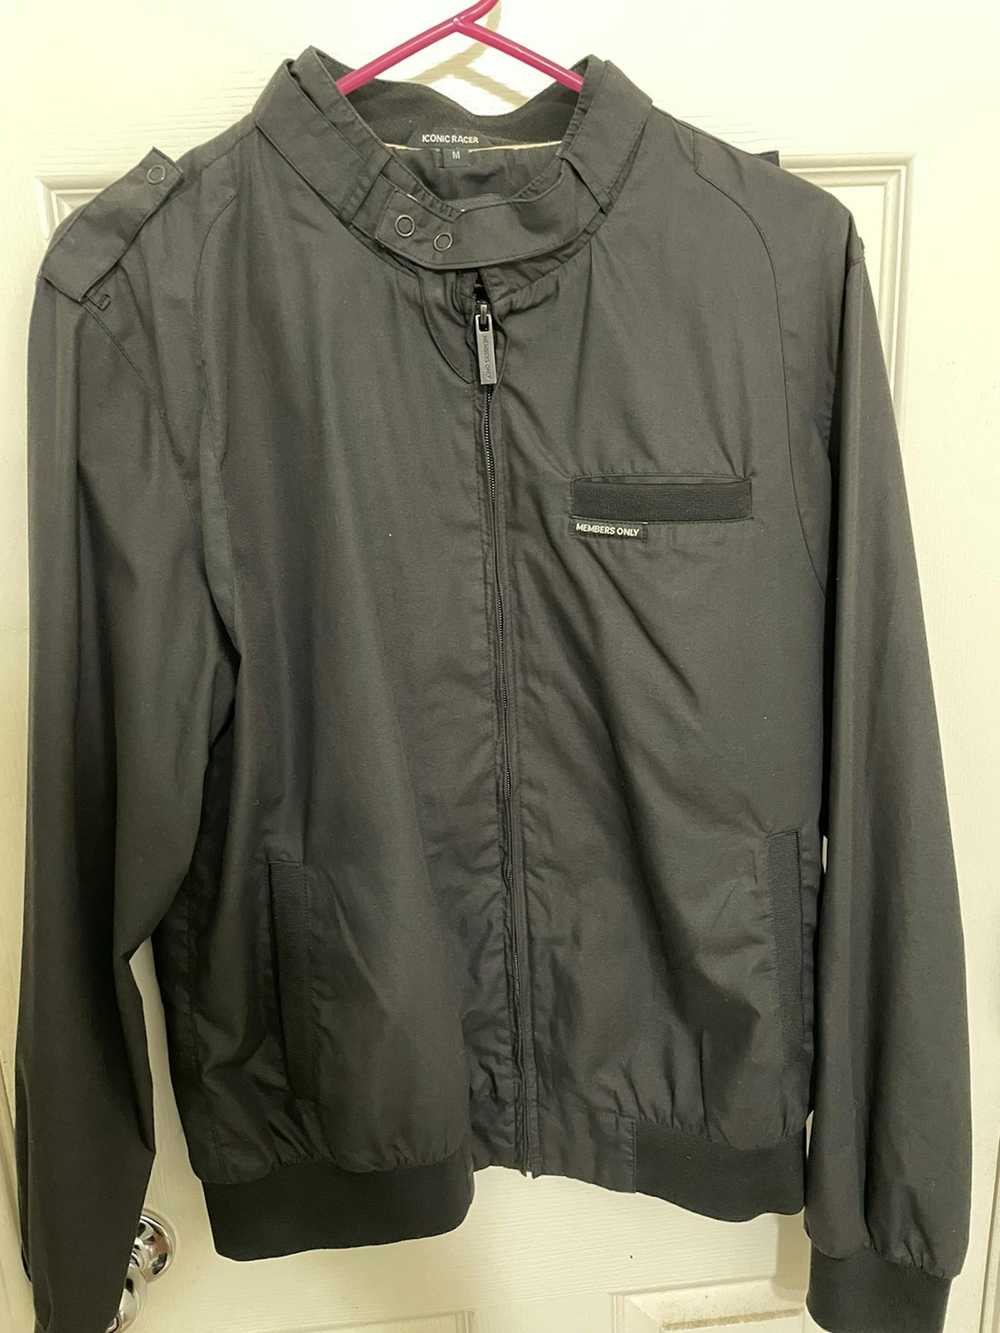 Members Only Iconic Racer Members Only Jacket - image 1